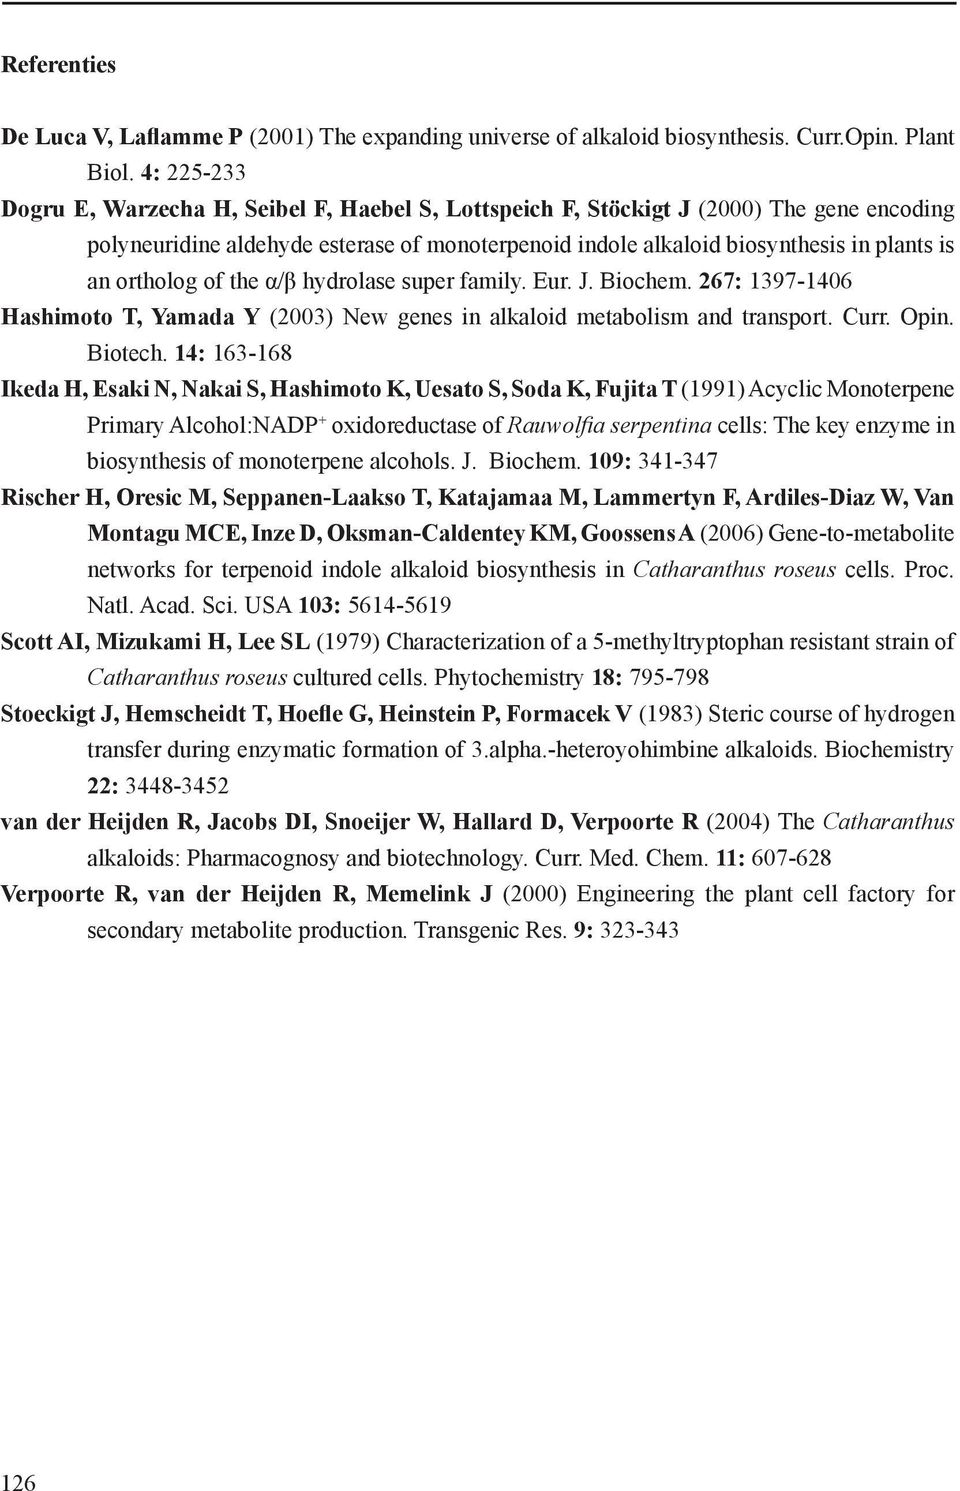 ortholog of the α/β hydrolase super family. Eur. J. Biochem. 267: 1397-1406 Hashimoto T, Yamada Y (2003) New genes in alkaloid metabolism and transport. Curr. Opin. Biotech.